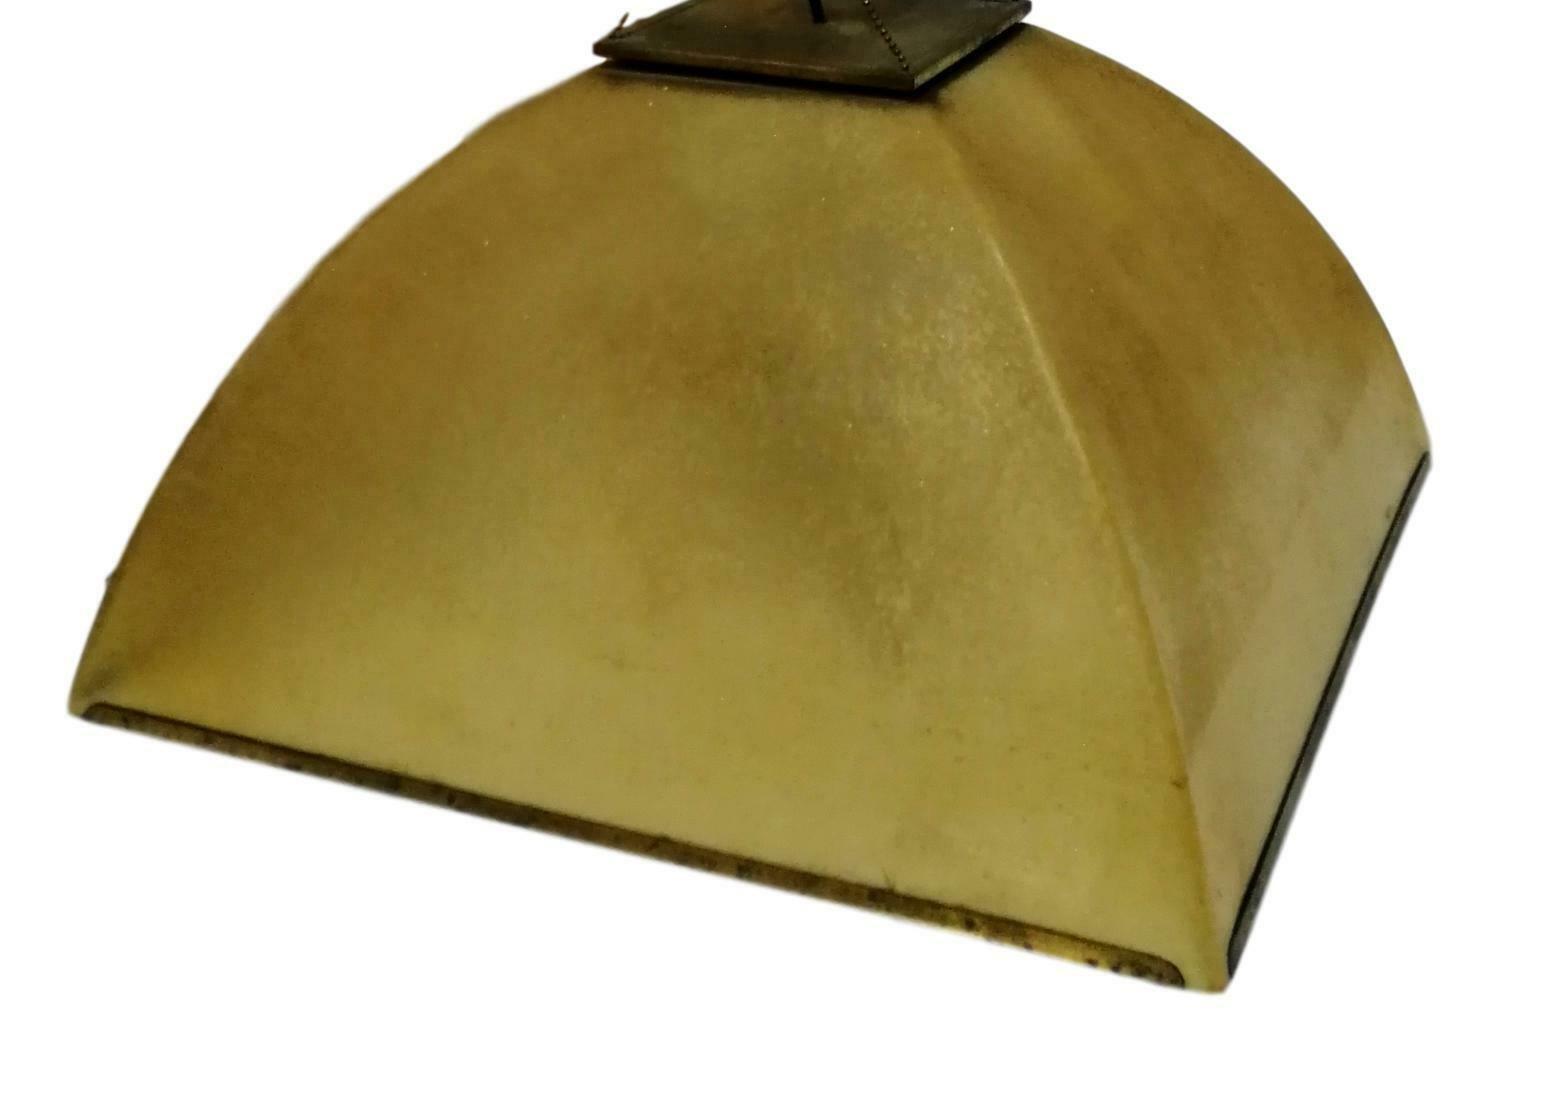 suspension lamp produced by Lamperti from the 1970s designed by Salvatore Gregorietti

made of the usual fiberglass material, with brass details, it has a large diffuser, with a square dome shape, connected to the upper part by means of chains